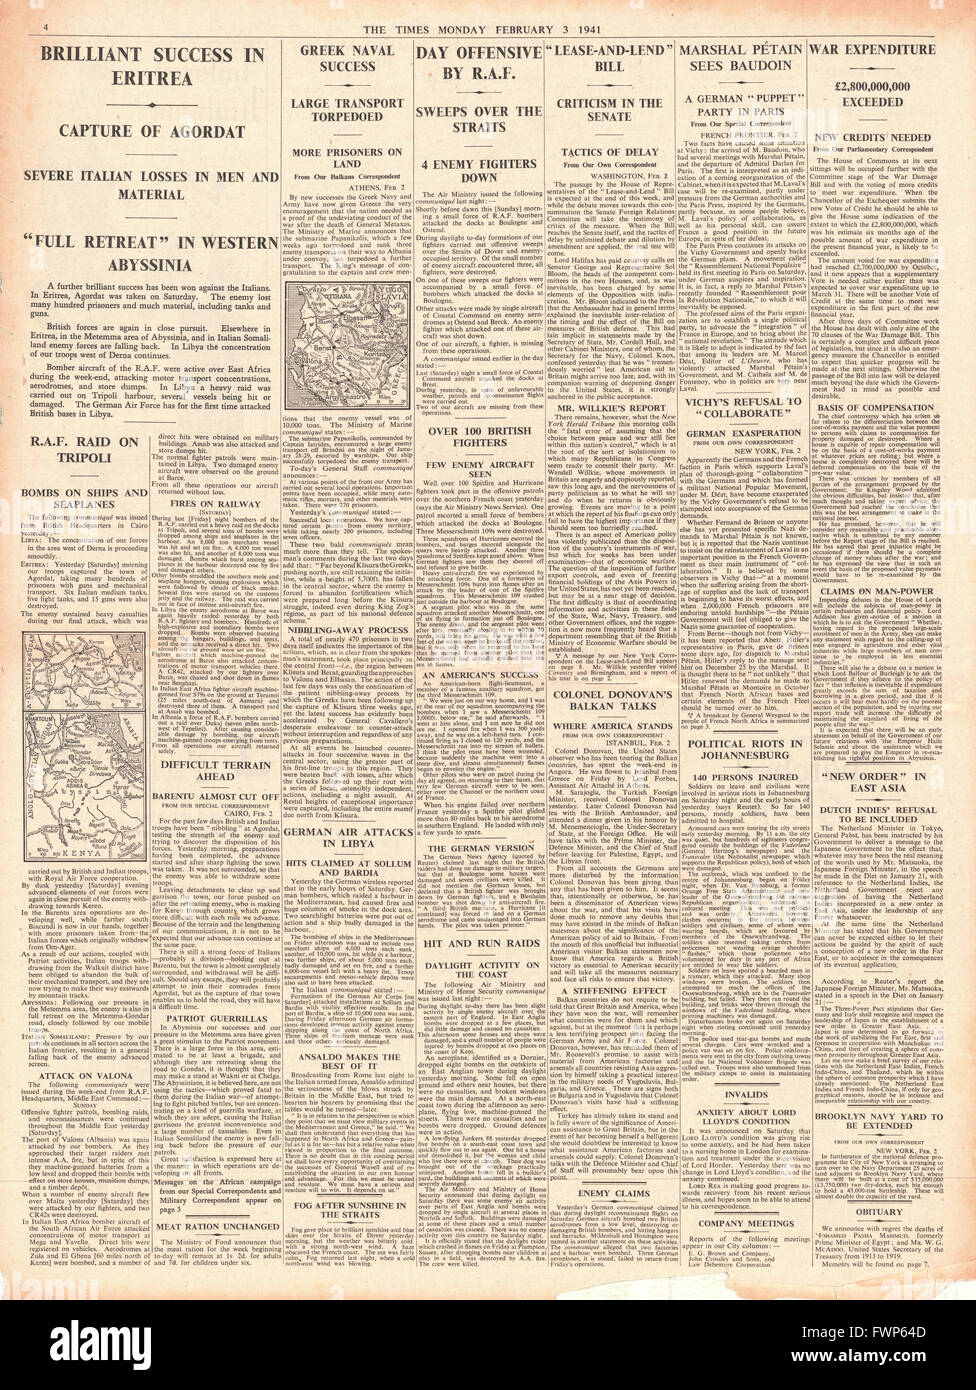 1941 page 4 The Times British and Indian Forces capture Agordat Stock Photo